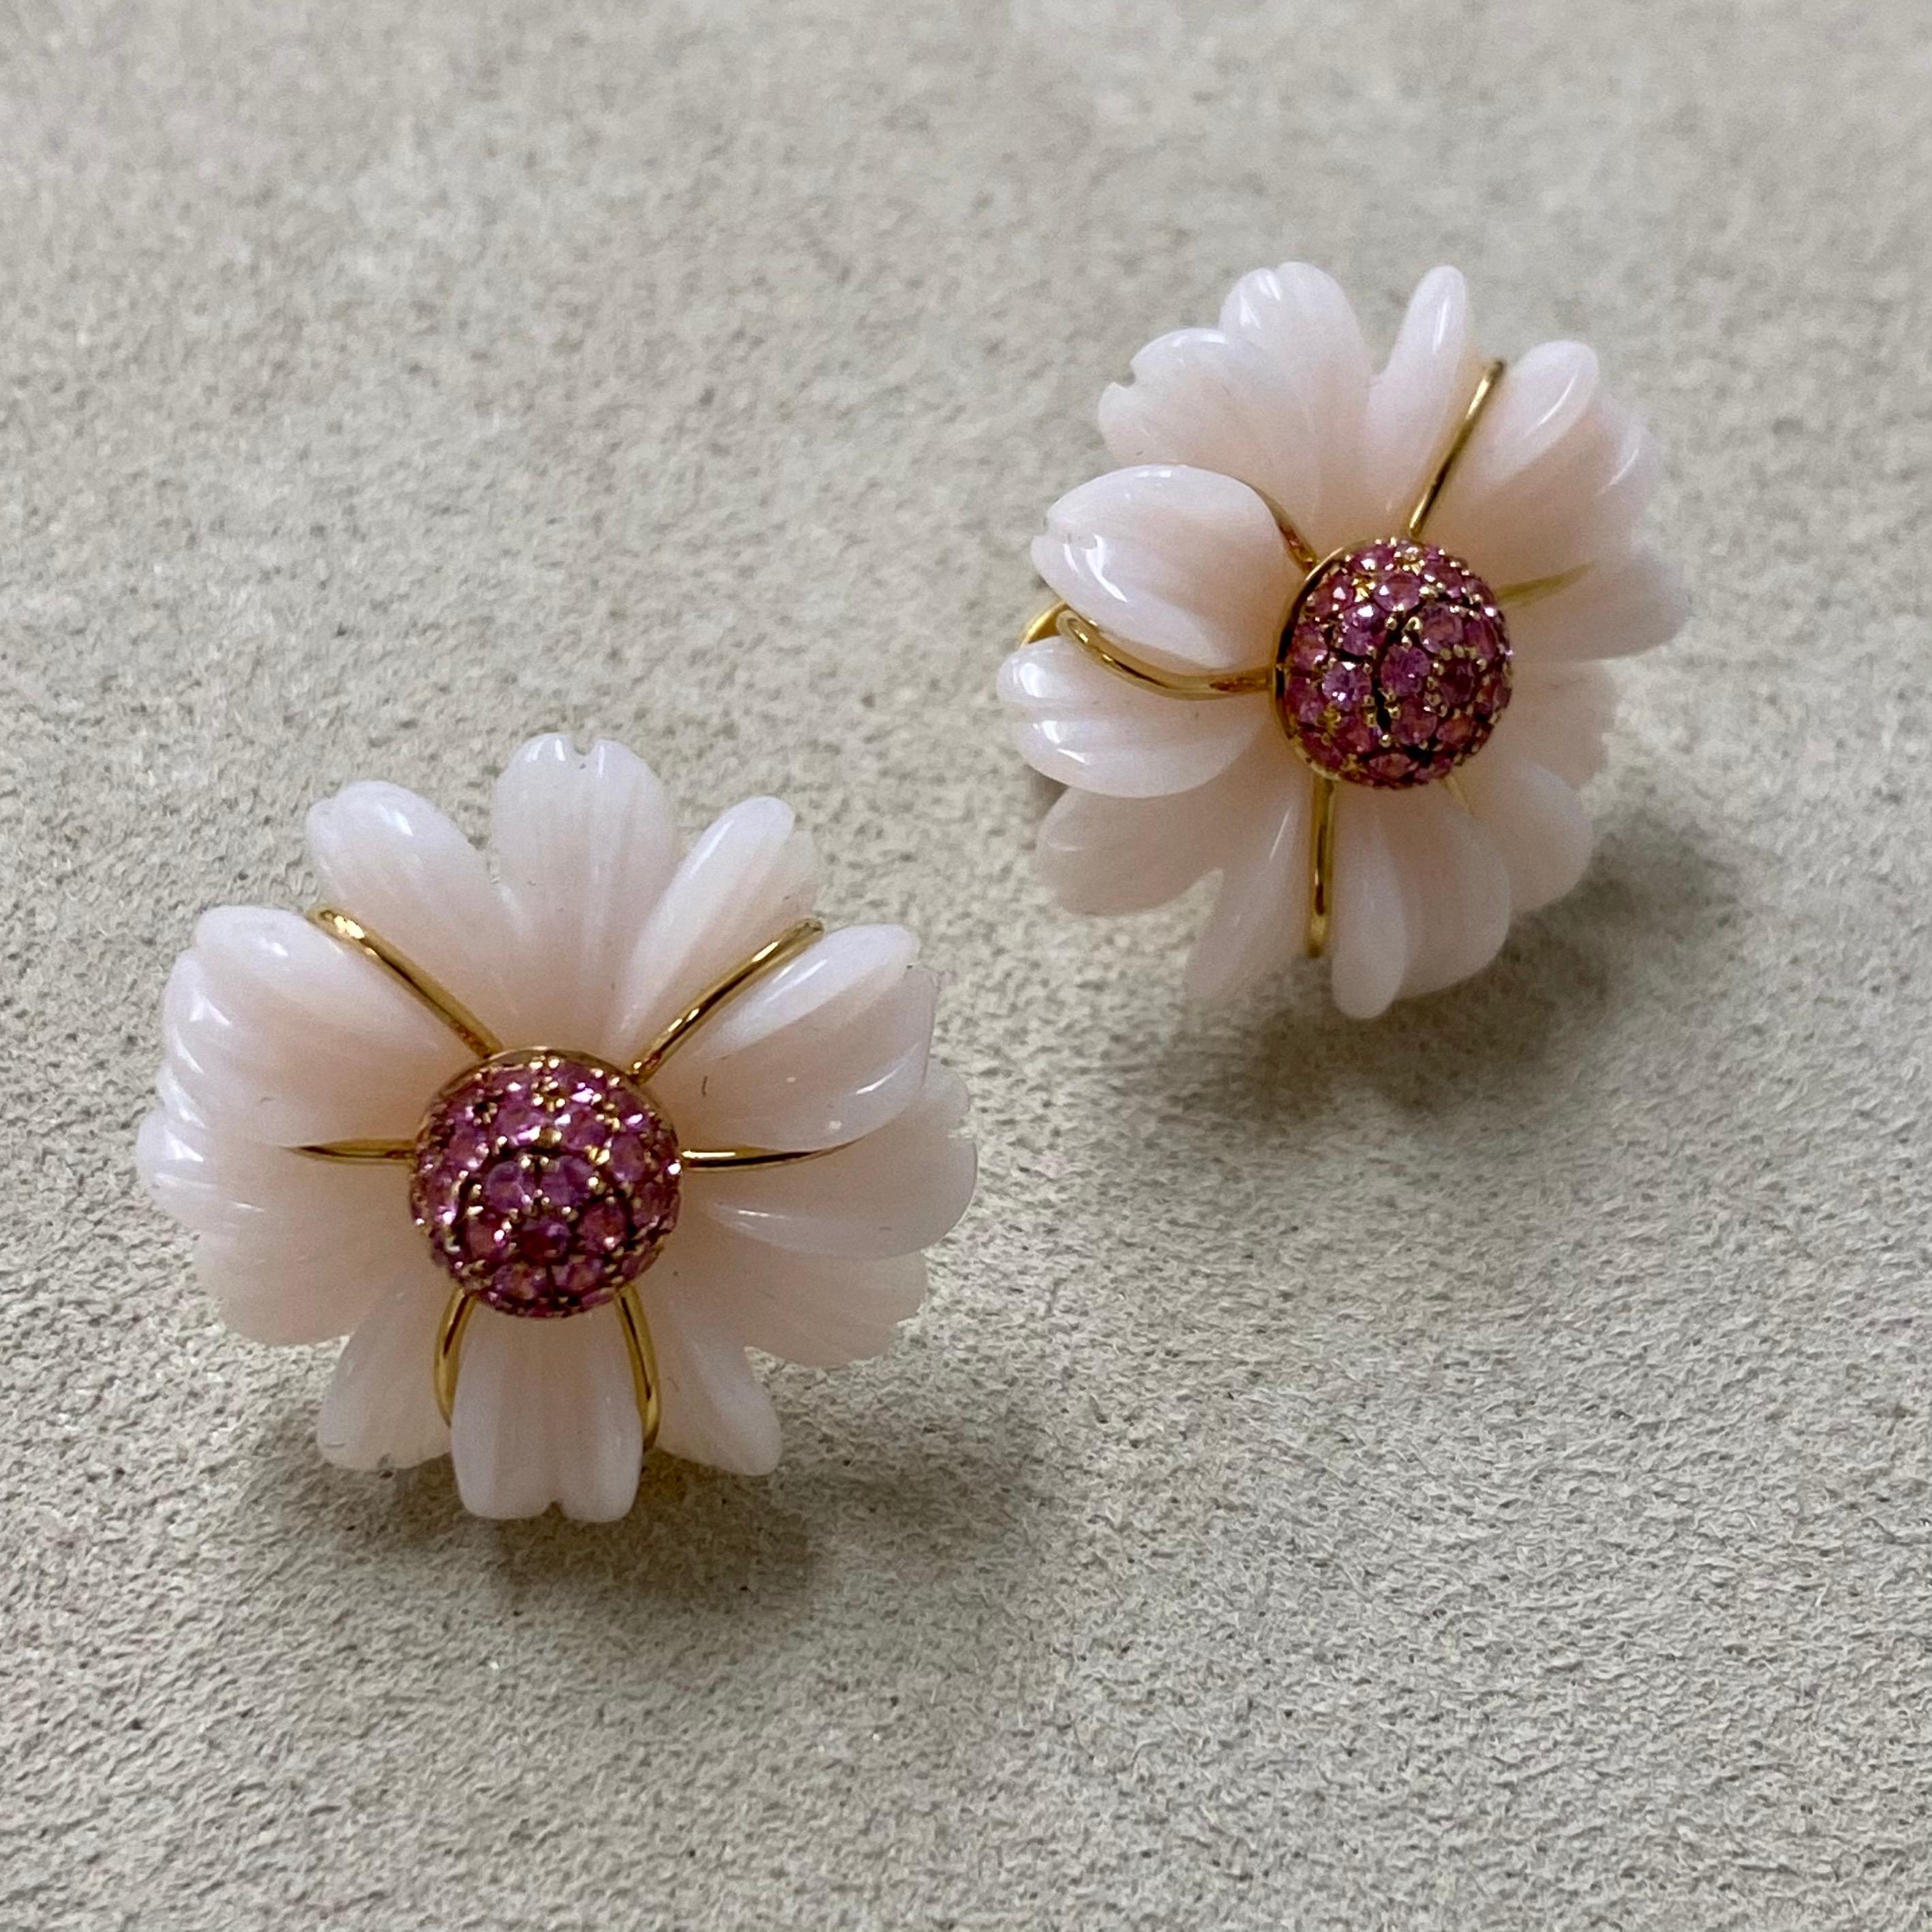 Created in 18 karat yellow gold
Hand carved pink opal flowers
Hand carved in Australia
Pastel Pink Opal 13 carats approx.
Diamonds
One of a kind


About the Designers

Drawing inspiration from little things, Dharmesh & Namrata Kothari have created